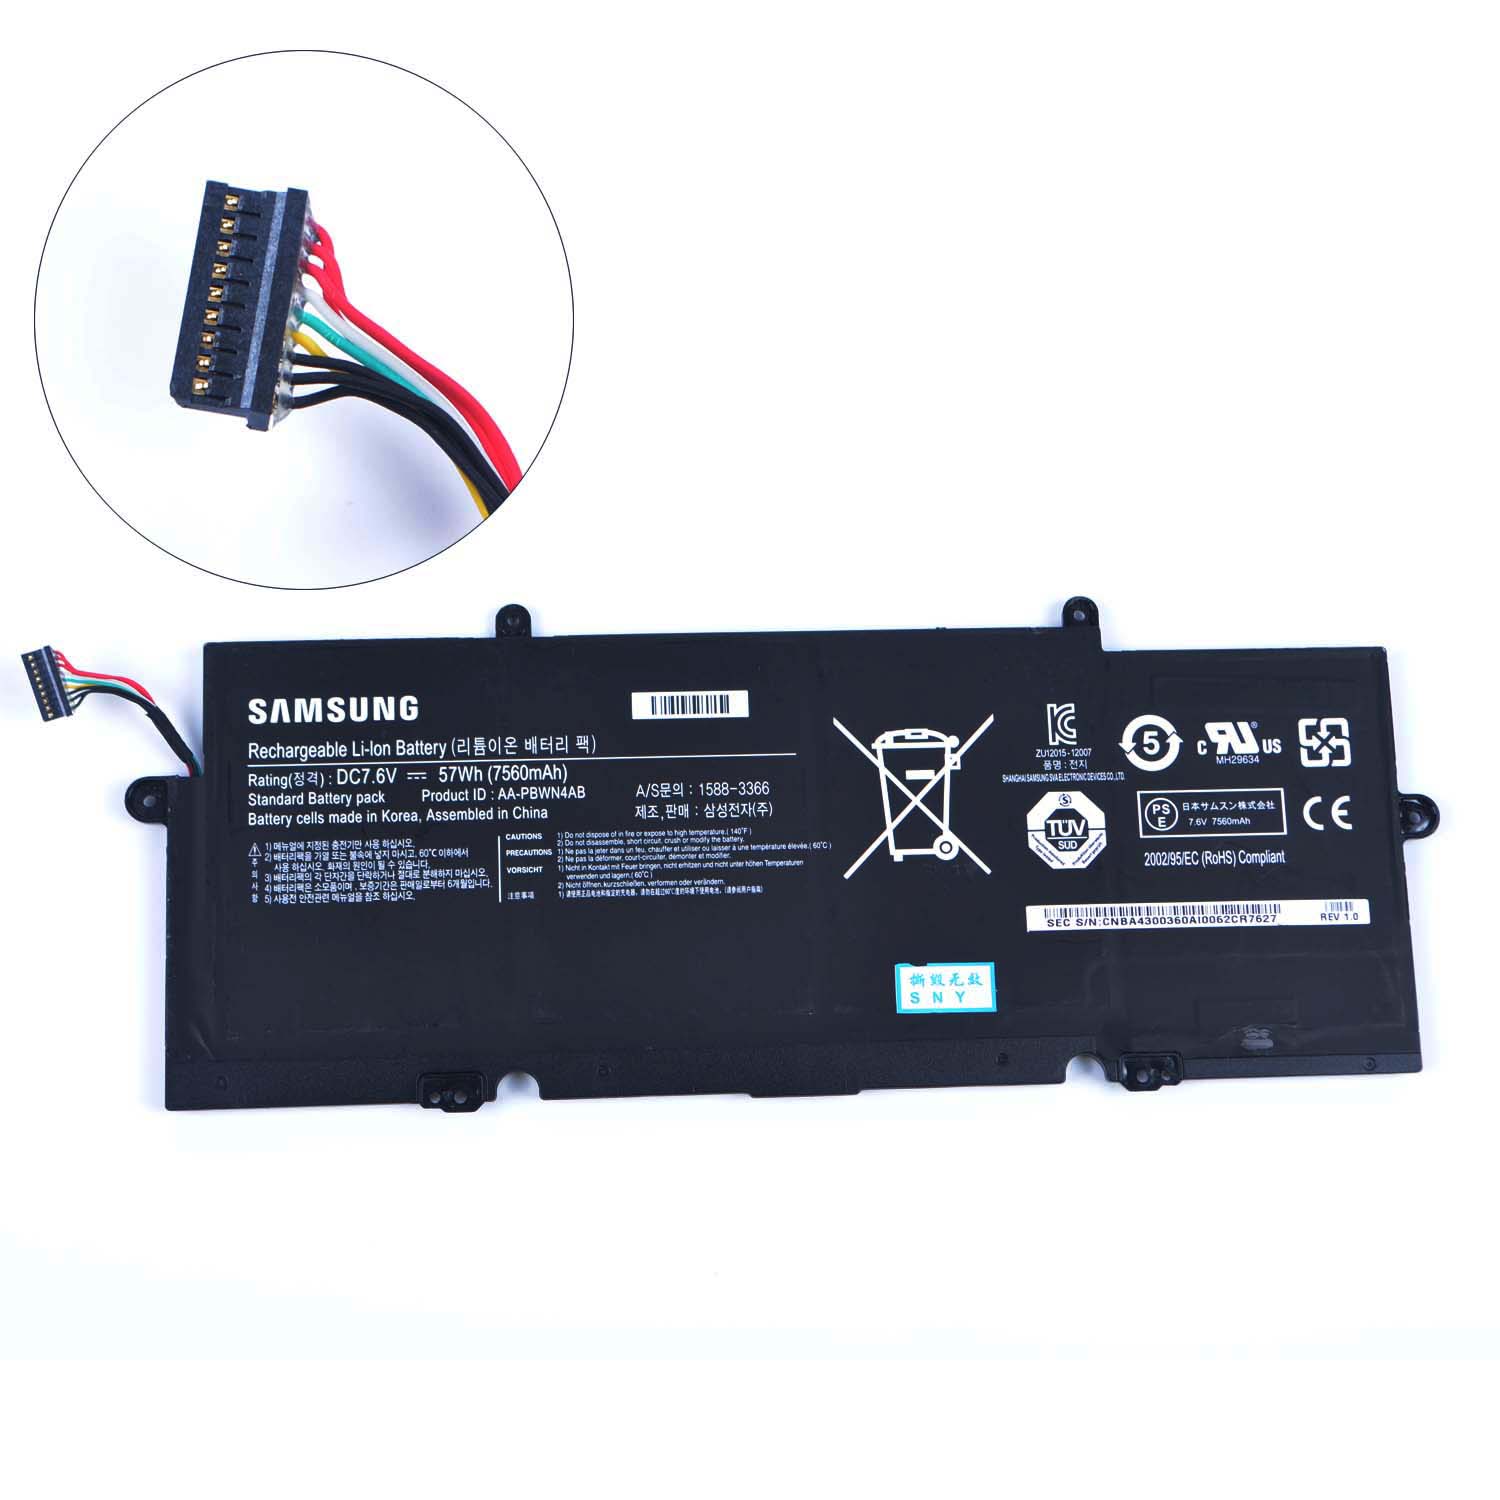 Replacement Battery for Samsung Samsung 740U3E-S01 battery